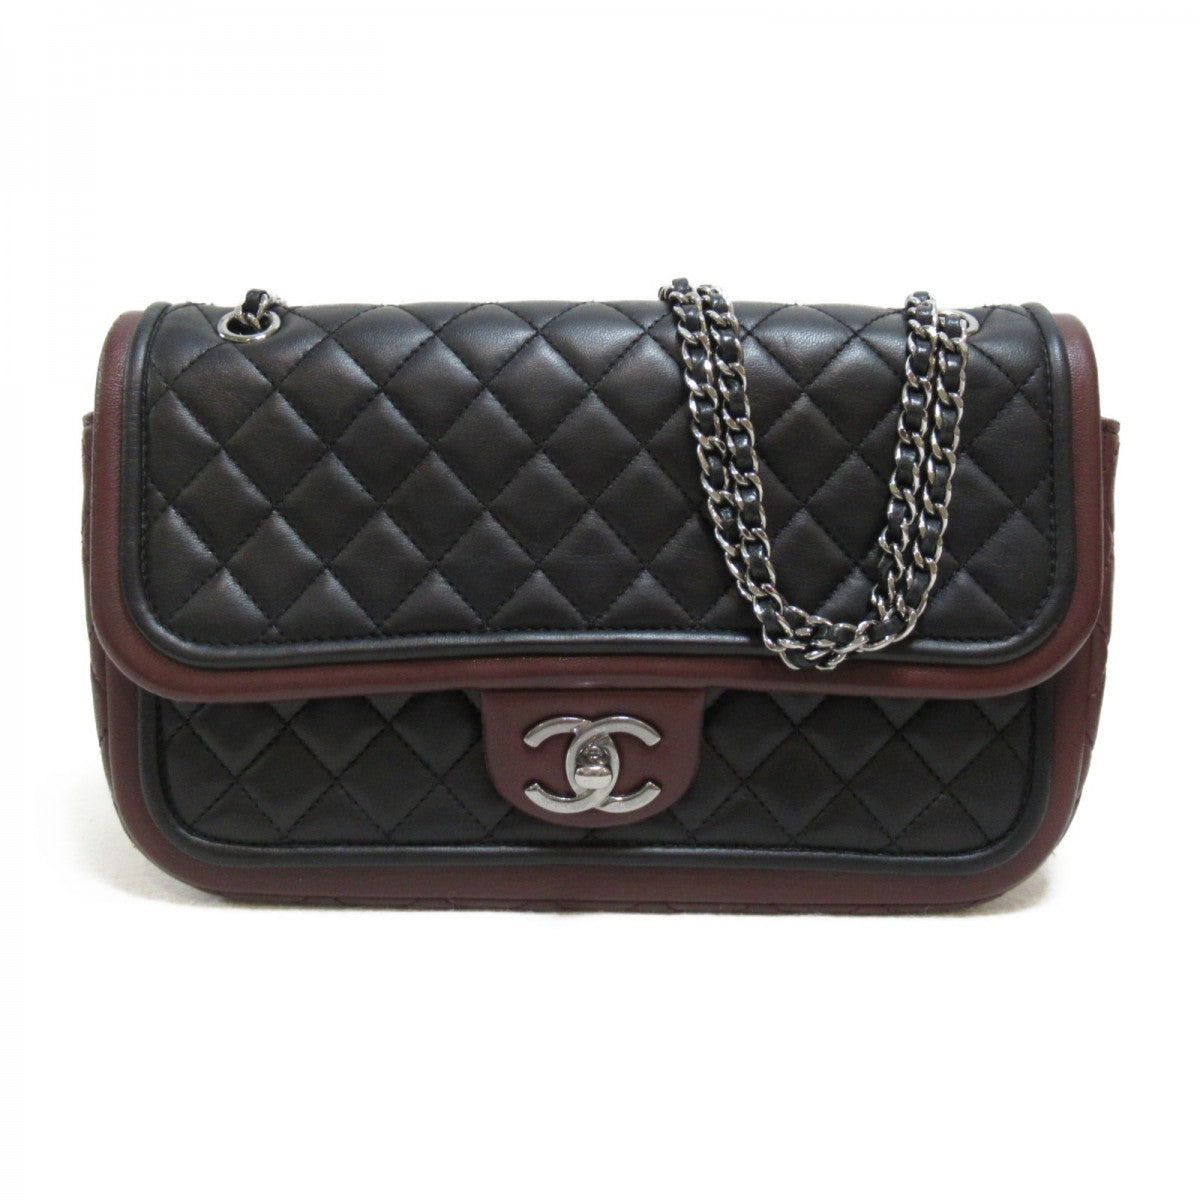 CC Quilted Leather Two Tone Twist Bag